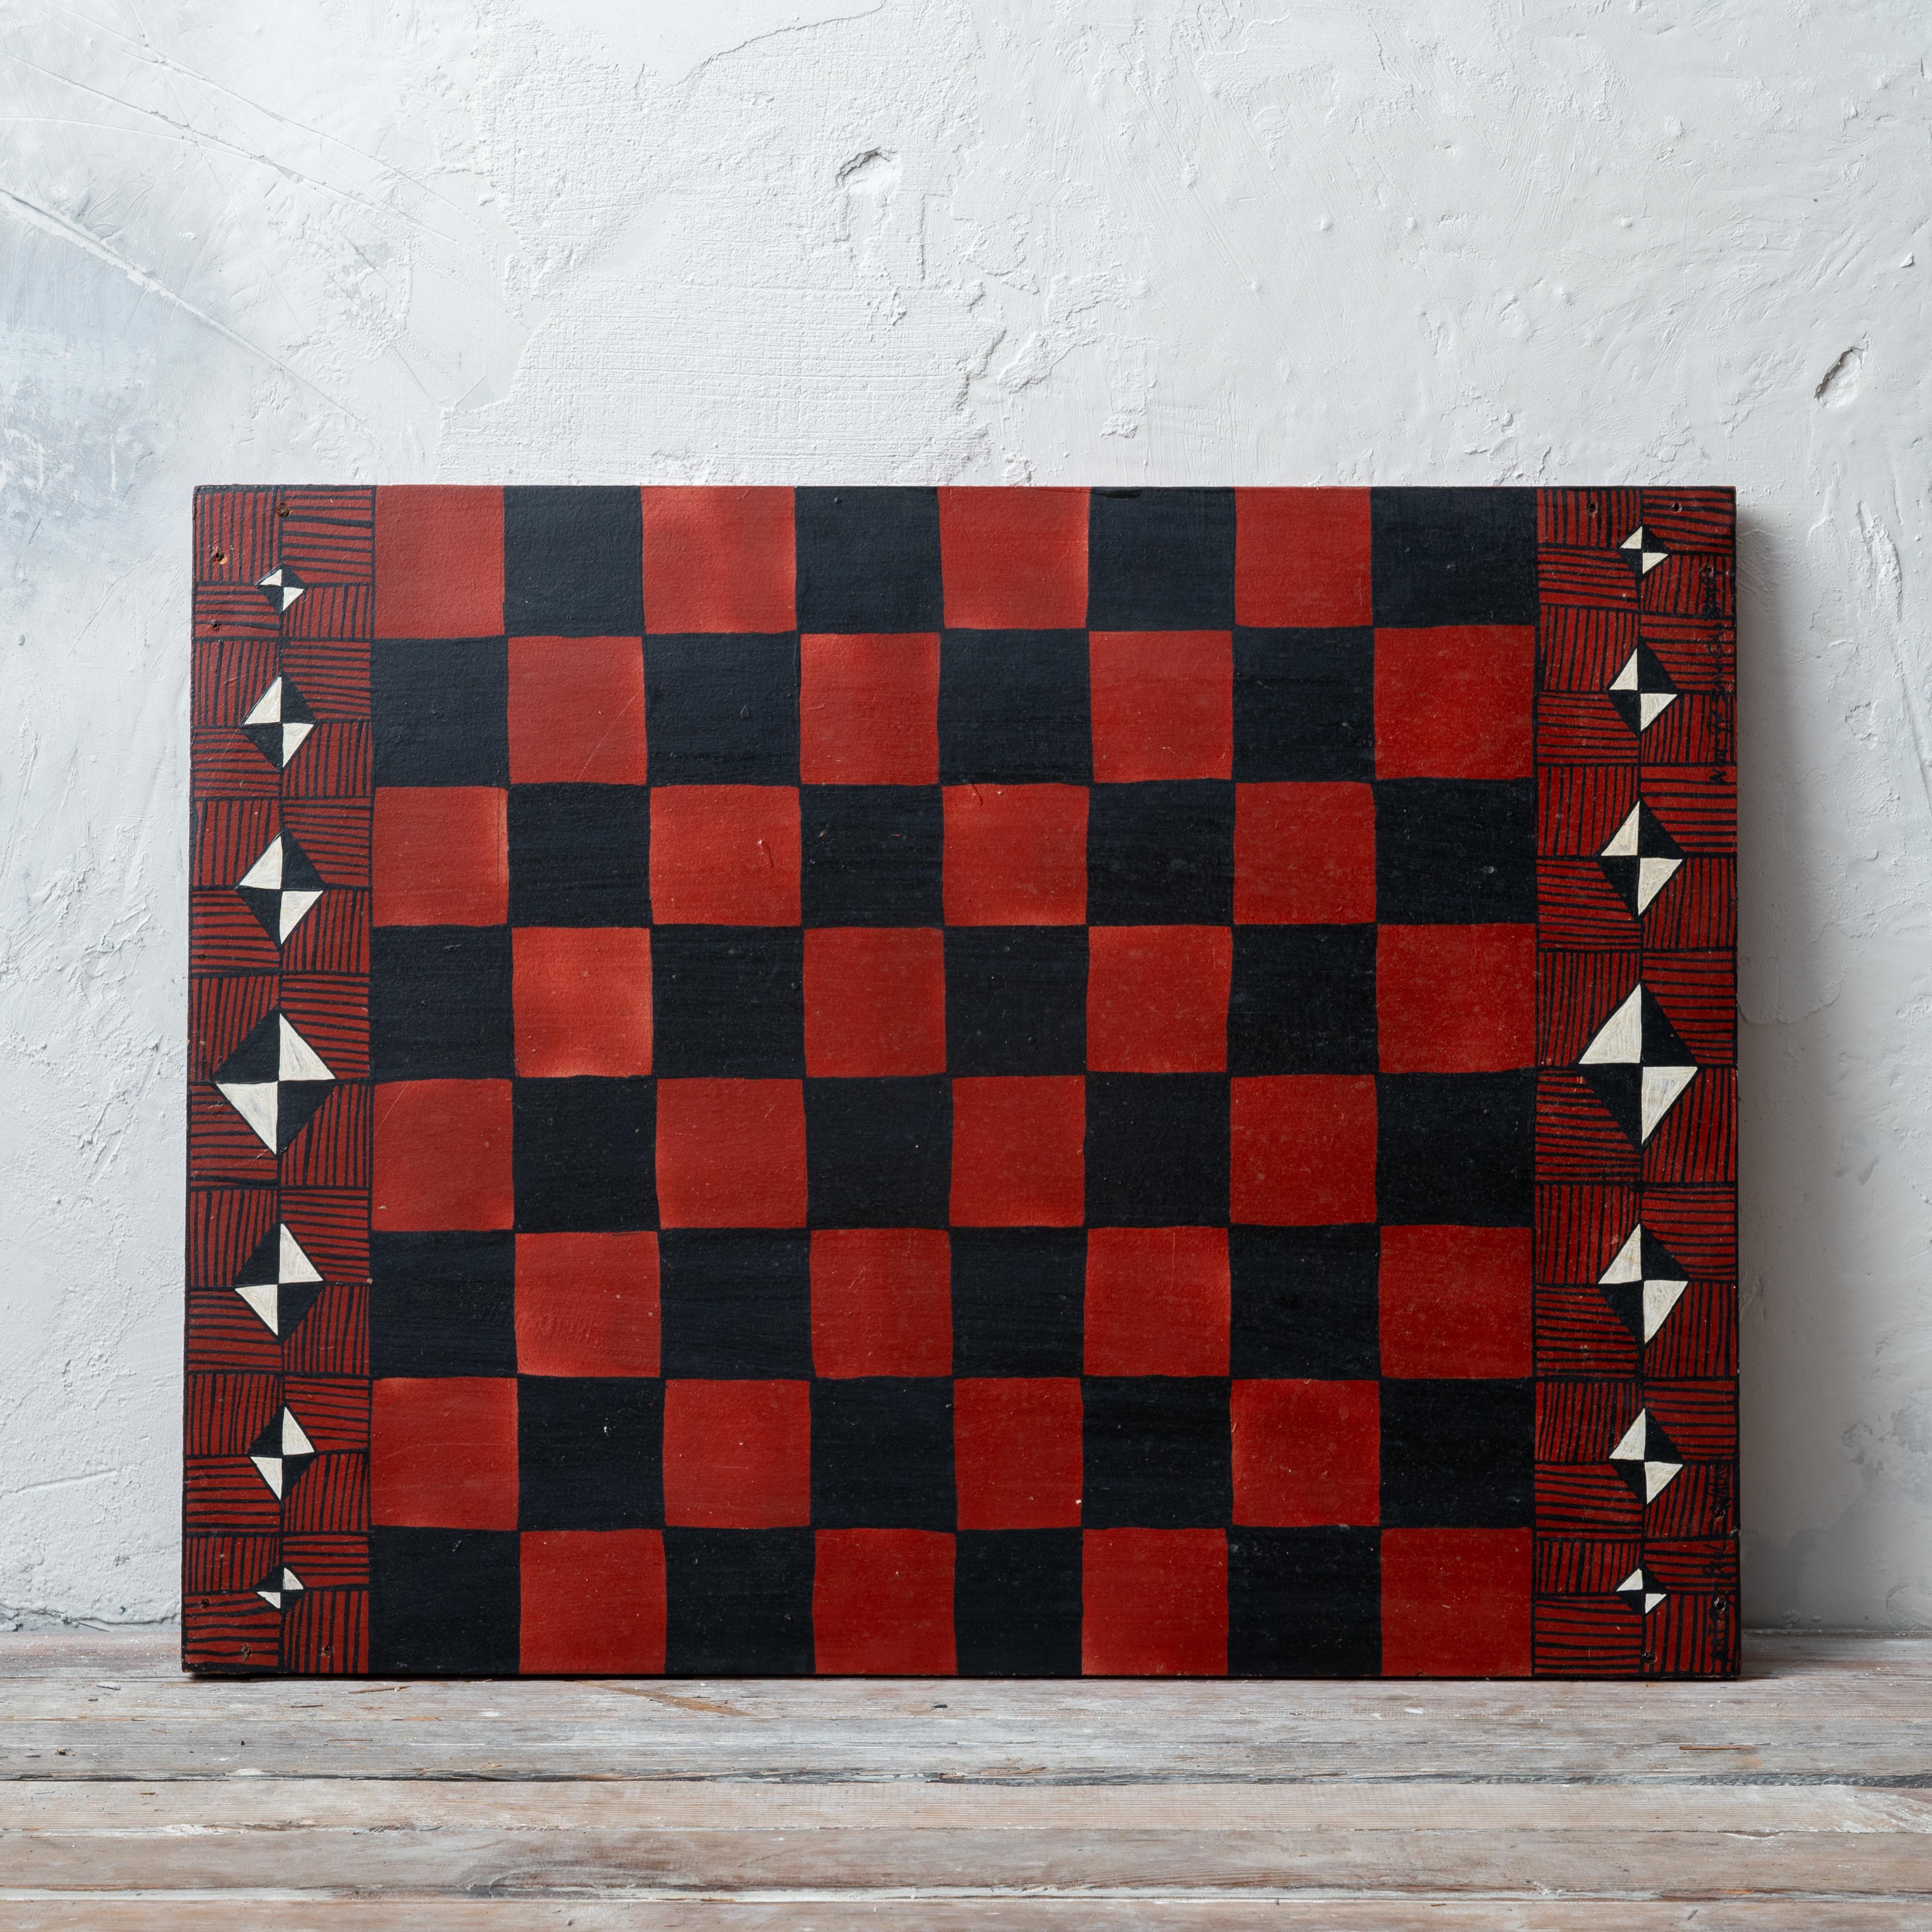 Paul Edward Walker

(American, b.1949)

Checkerboard

oil on board

signed “Art by Paul Walker”, “Nov. 97, Savannah, GA”

26 by 20 inches; ¾ inches deep

Paul Walker is a Savannah, Georgia outsider artist who made art out of discarded materials.